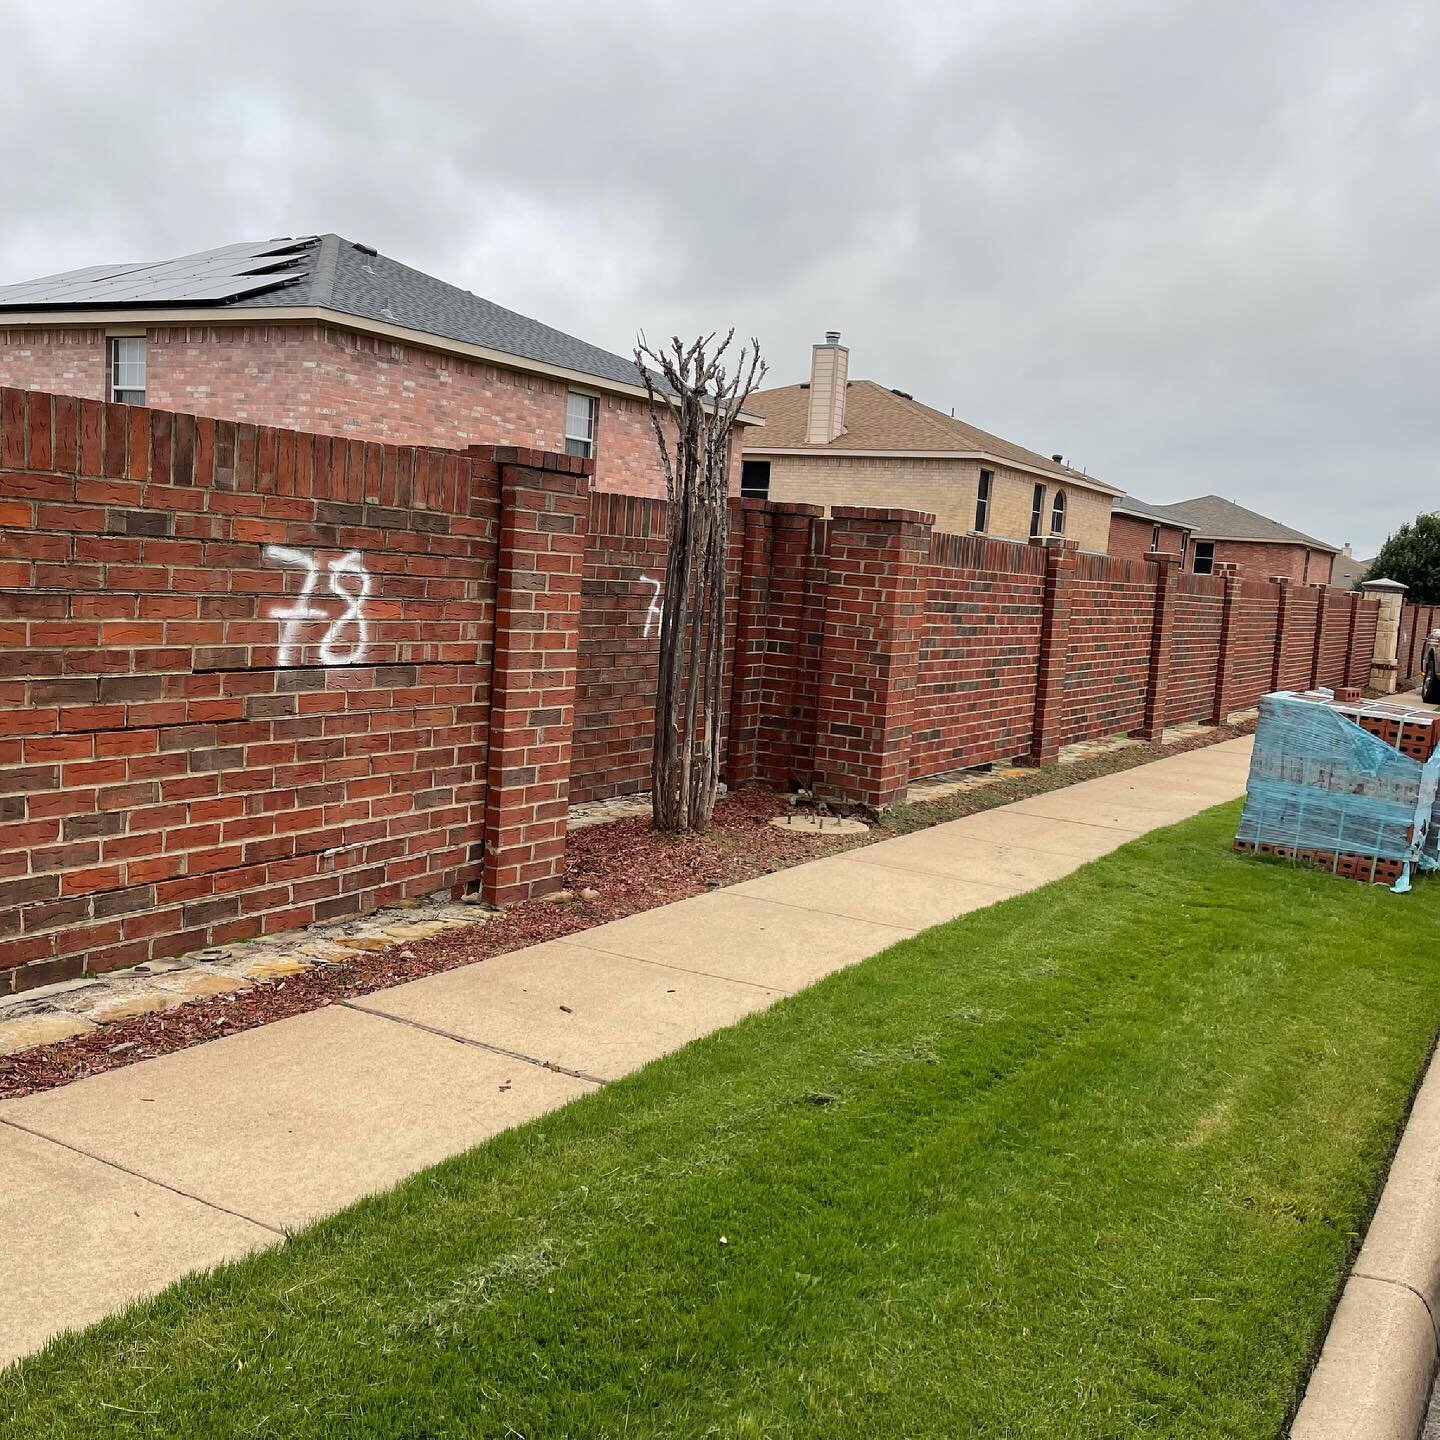 Screening wall rebuilding for Silverado Springs HOA. The new panels are a brick match that I ordered in October of 2020. Talk about a high value brick! #brick #brickwall